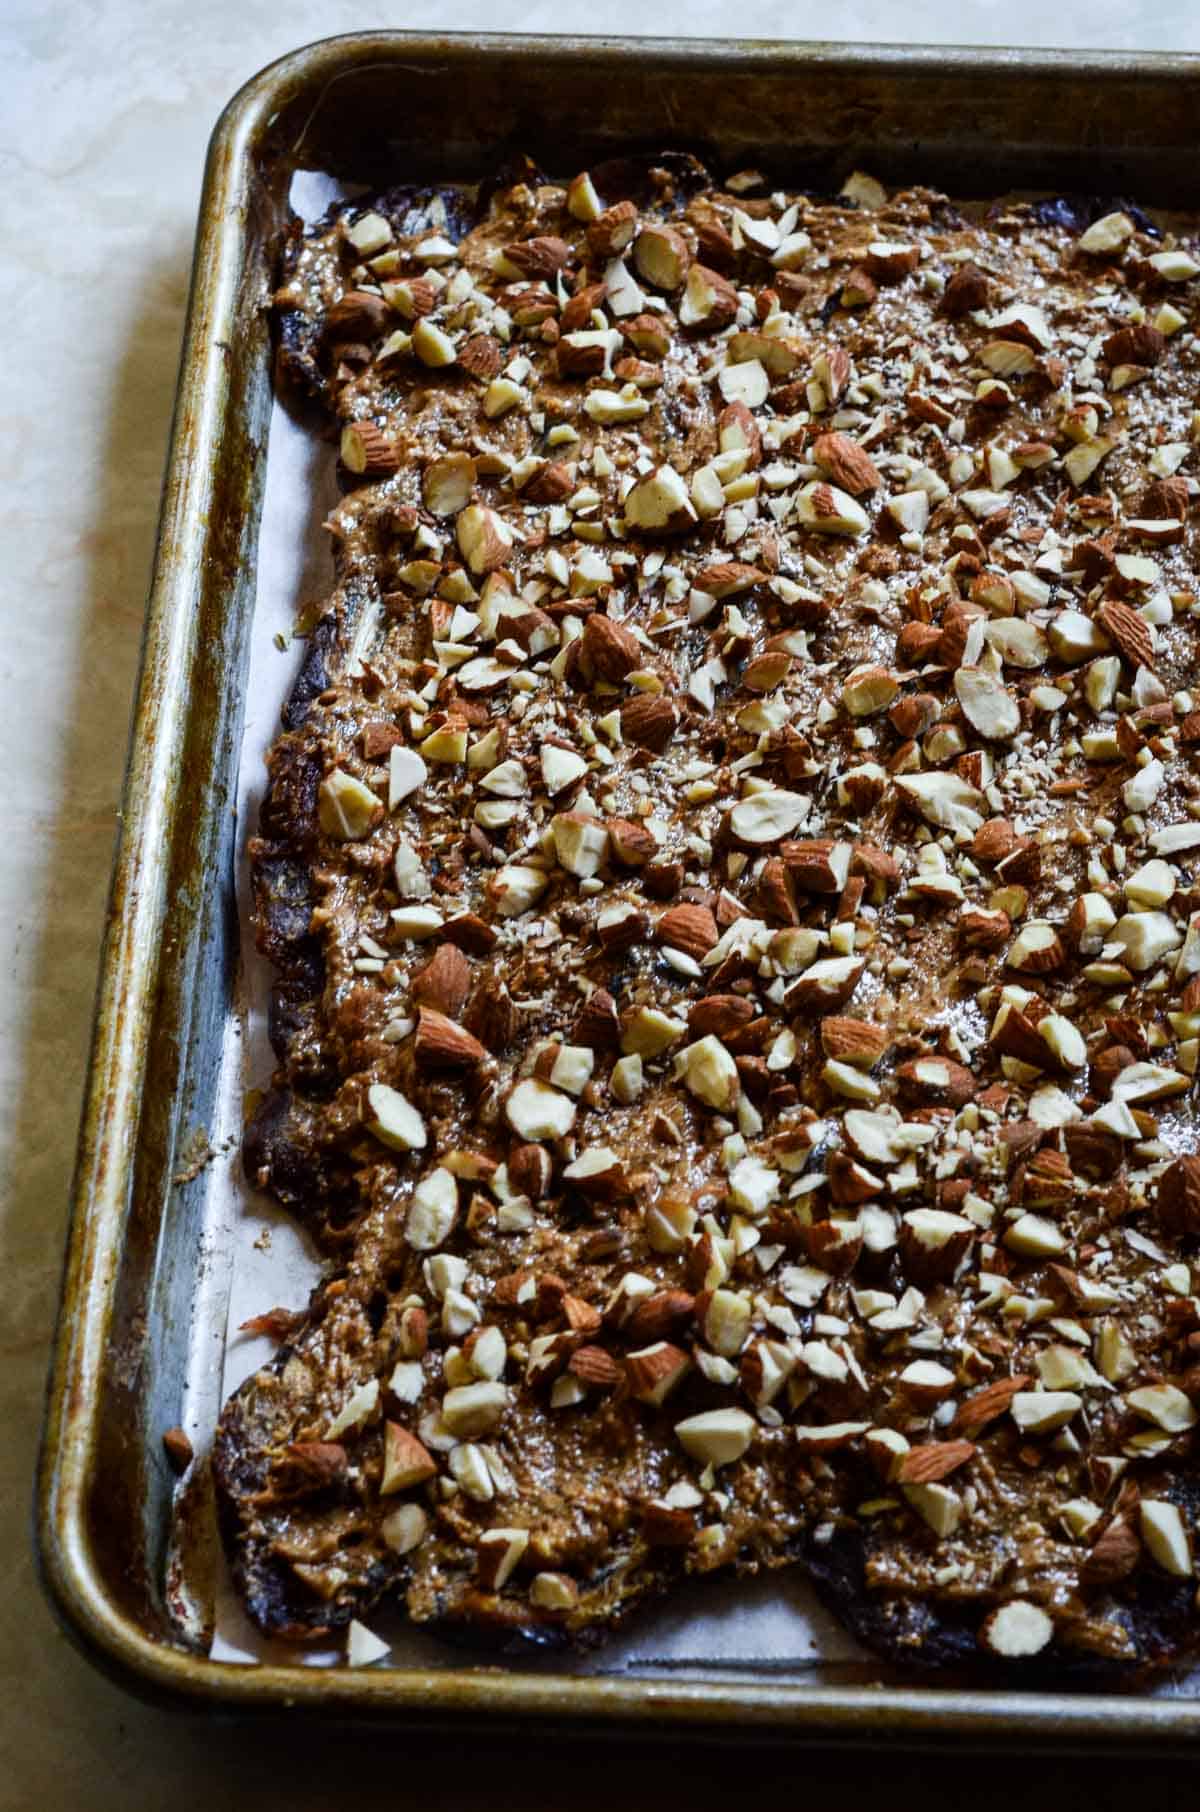 Almond butter and chopped nuts covering flattened dates on a small baking tray.